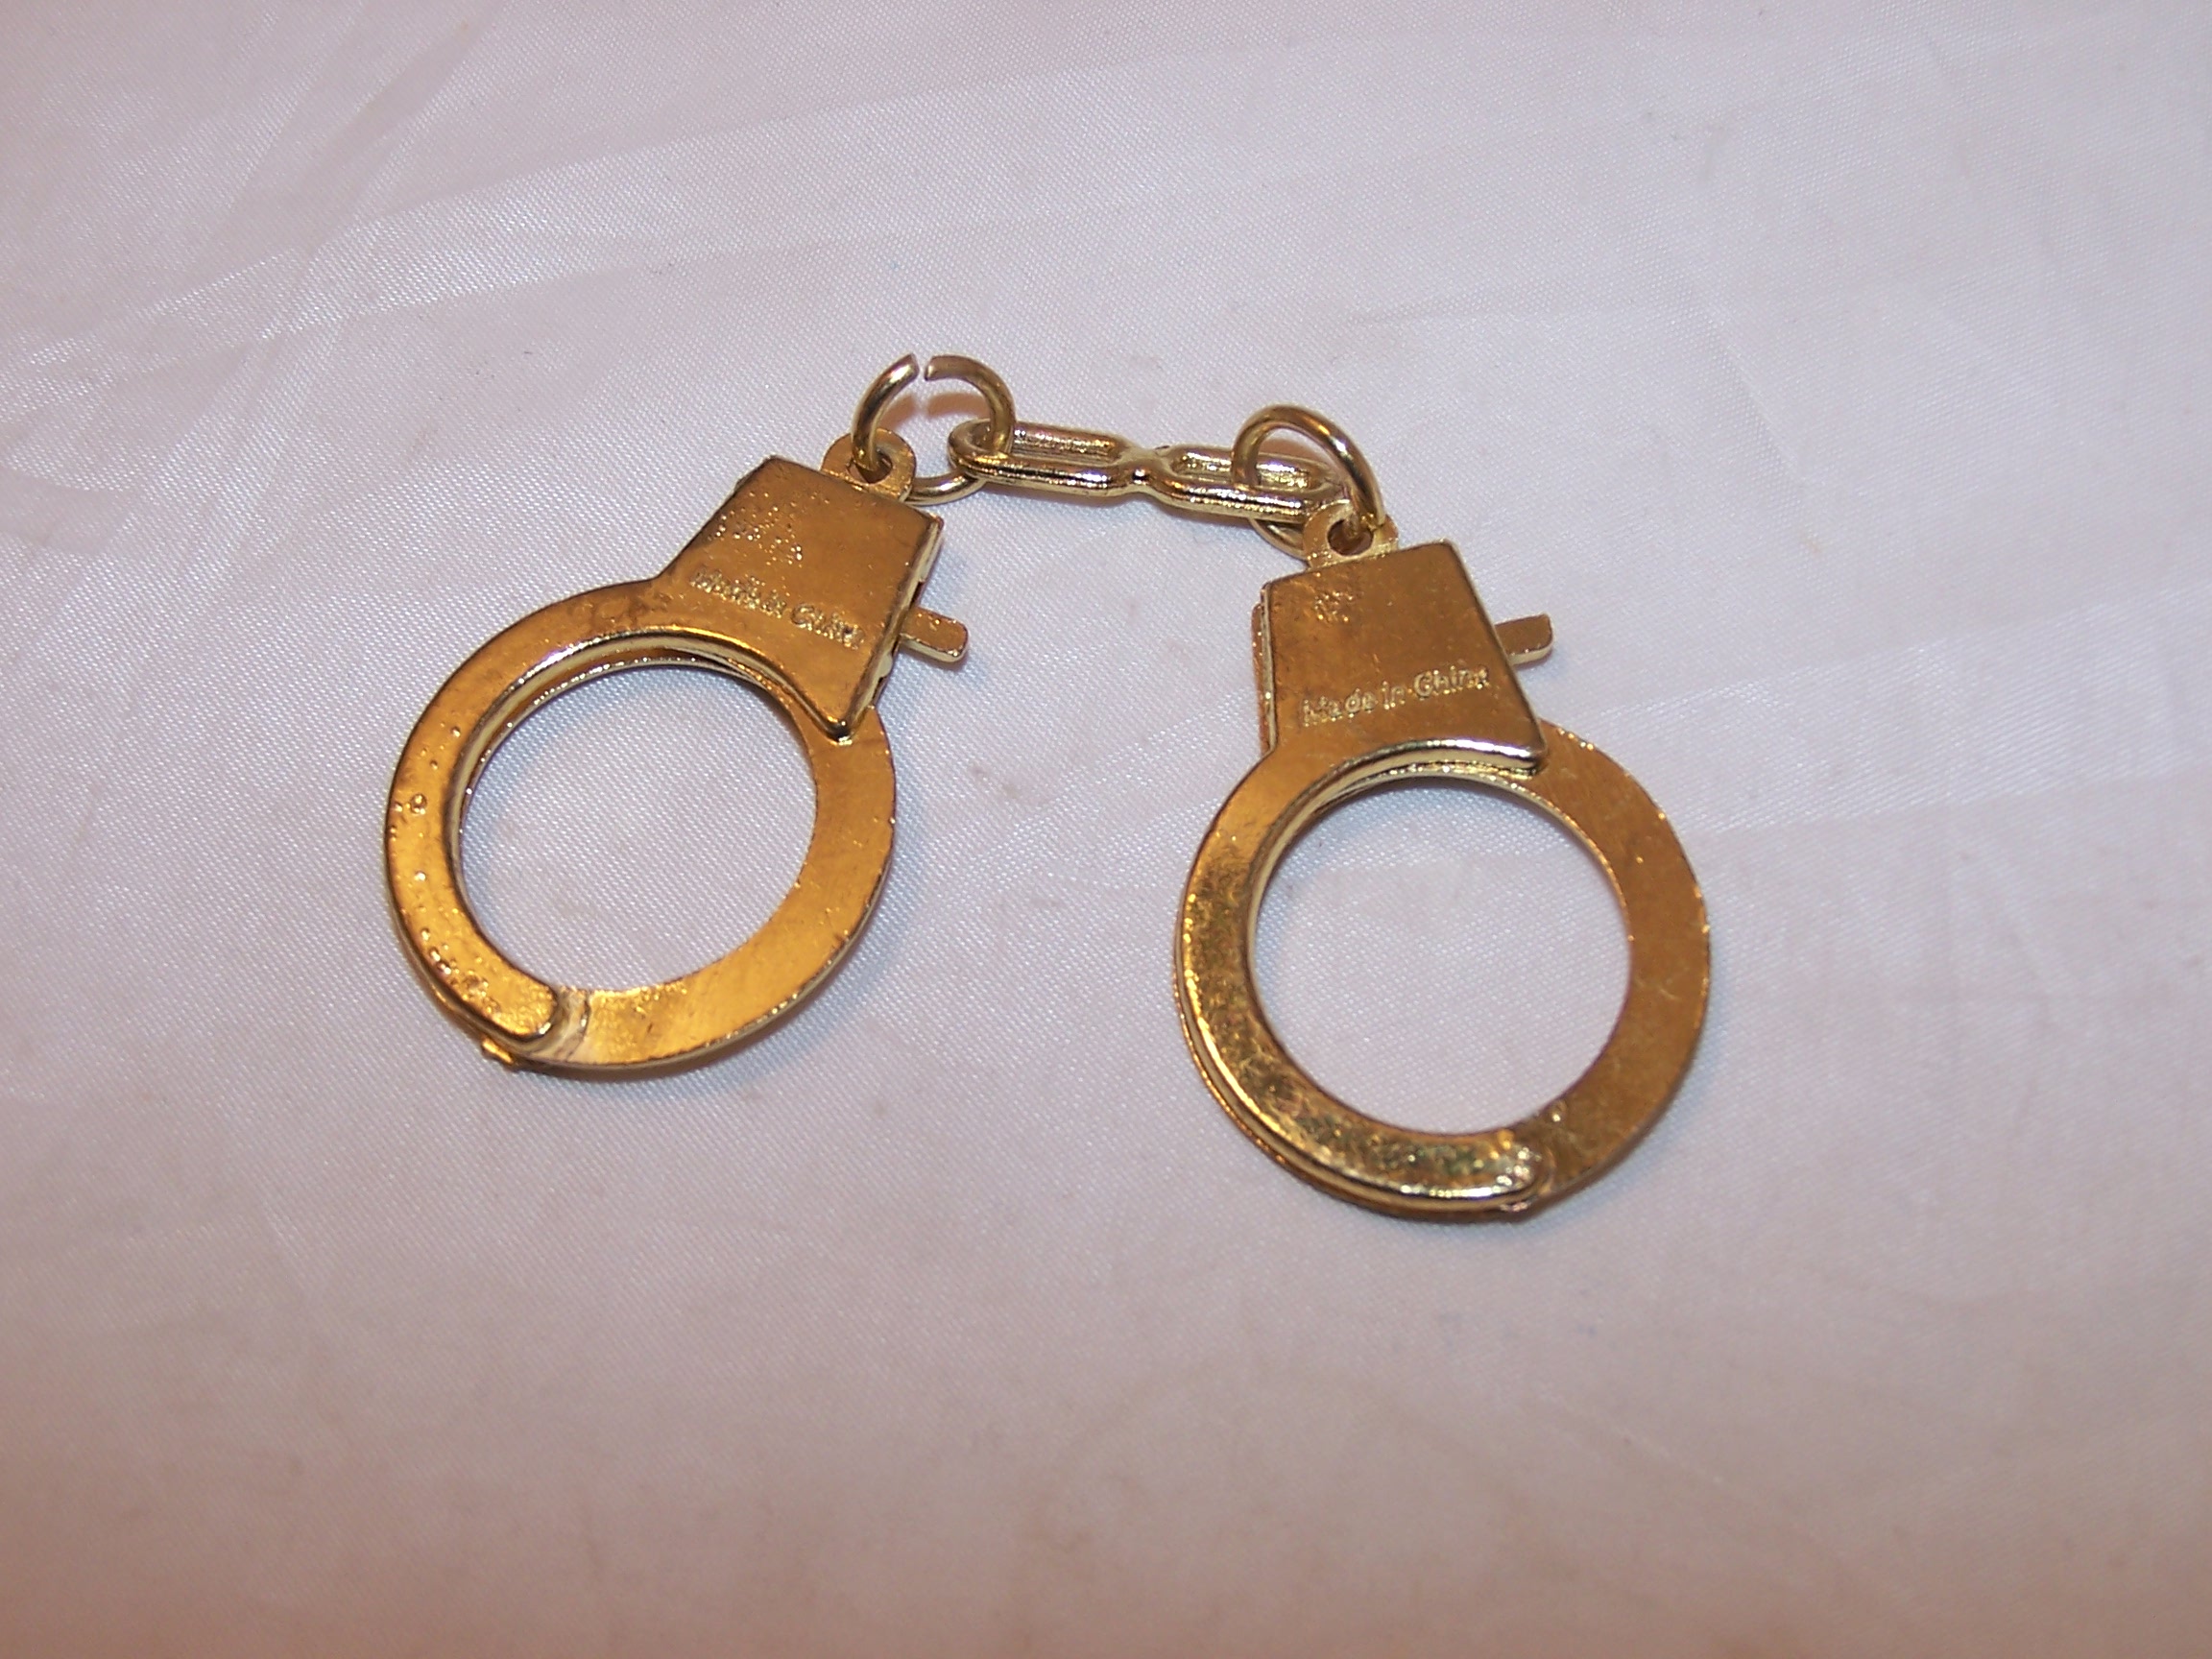 Image 2 of Handcuffs, Miniature Gold, Metal